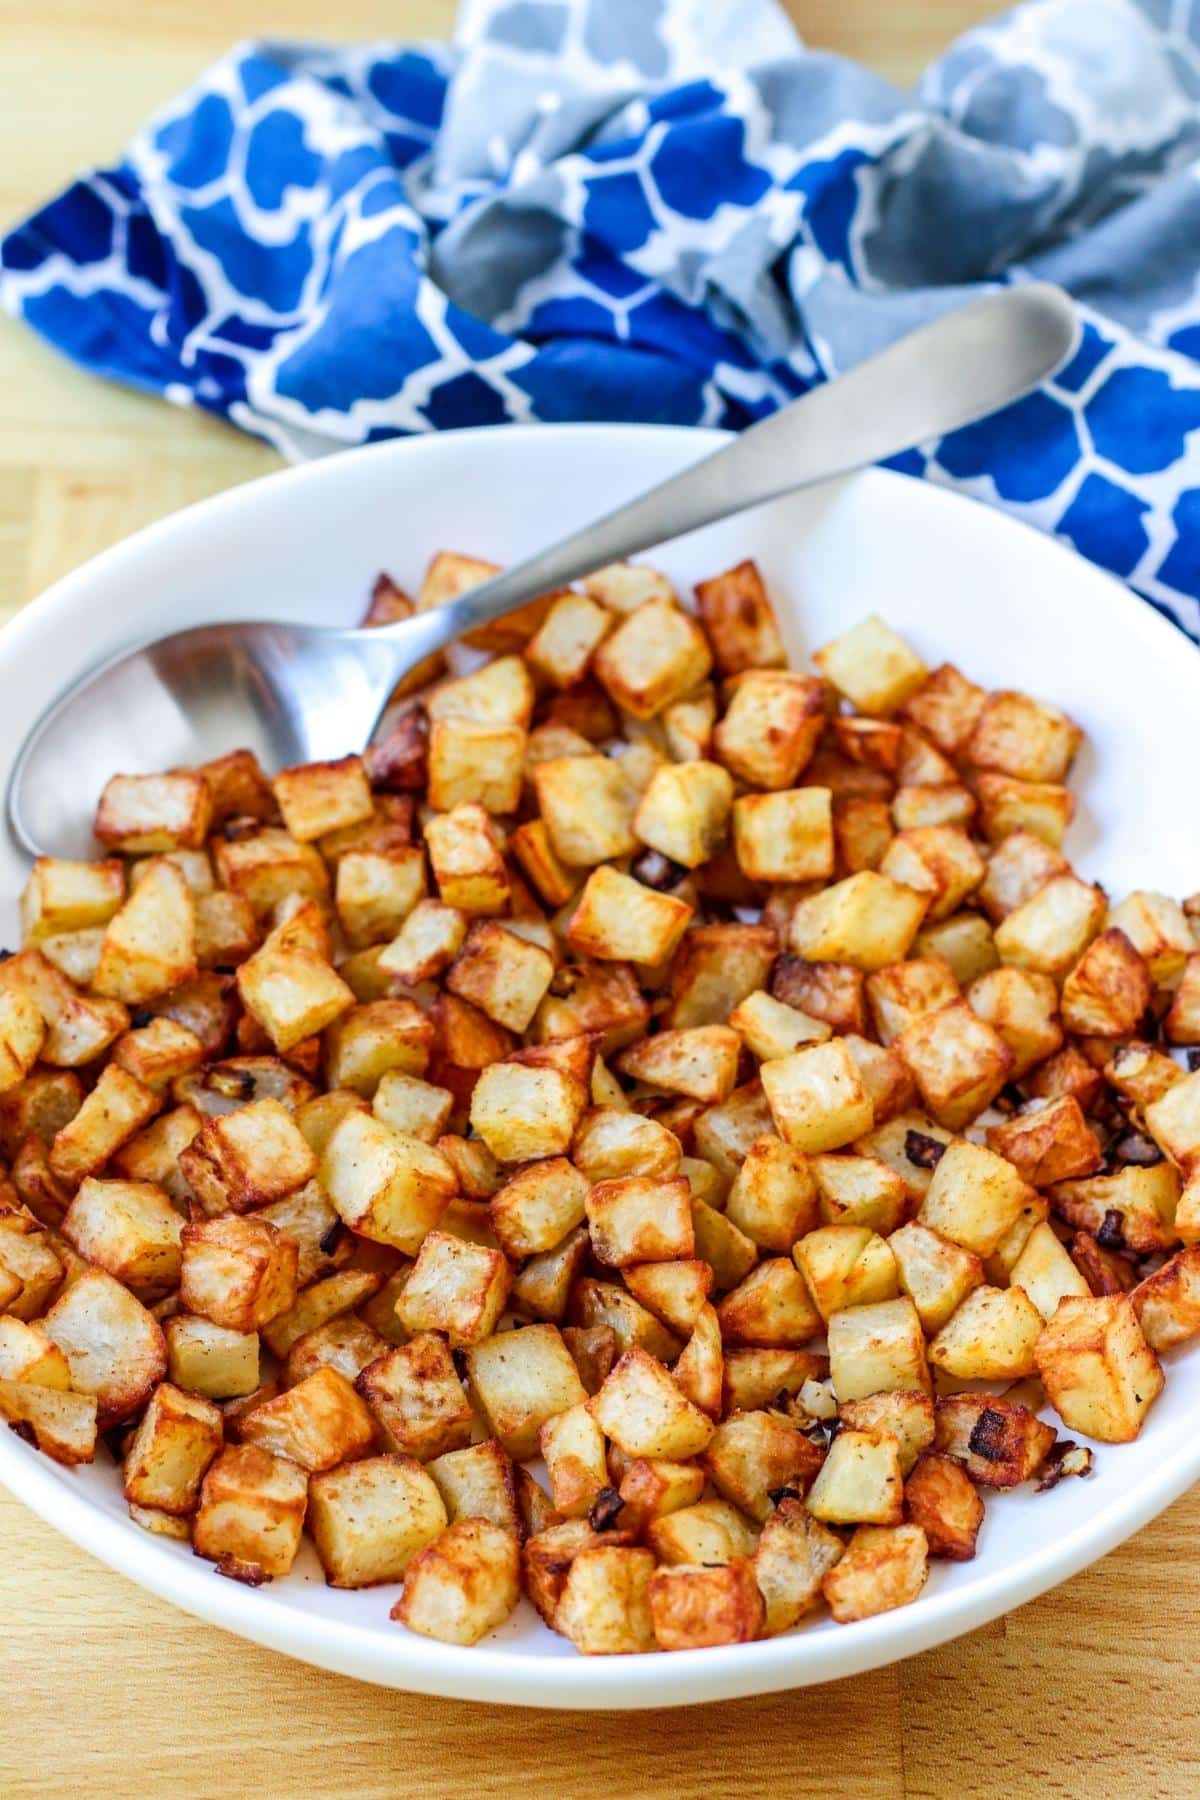 Home fries and a spoon in a shallow serving bowl with a blue patterned napkin in the background.